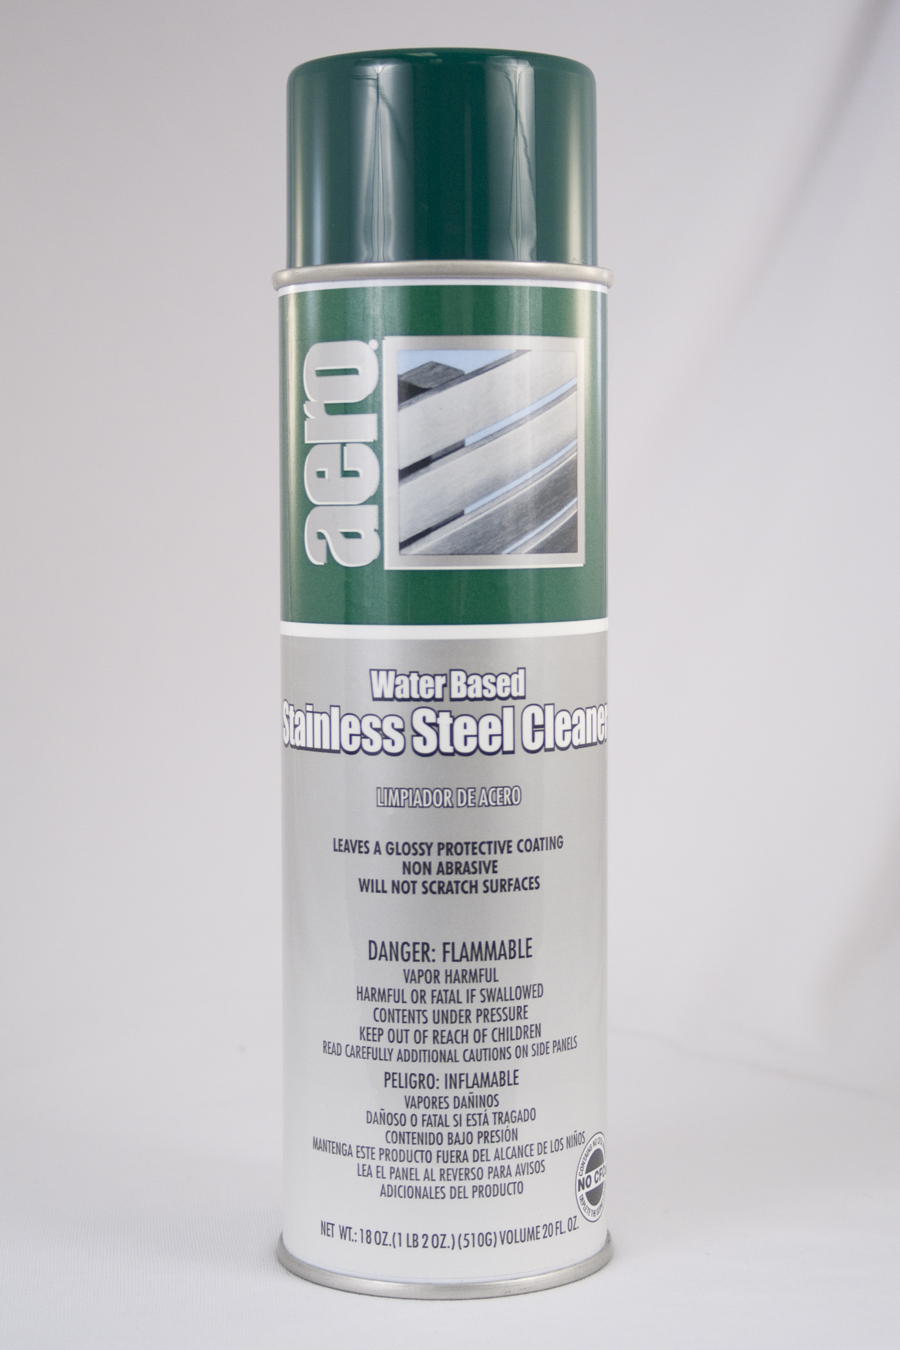 STAINLESS STEEL CLEANER
12-20OZ (WATER BASED) 
(458720FA)